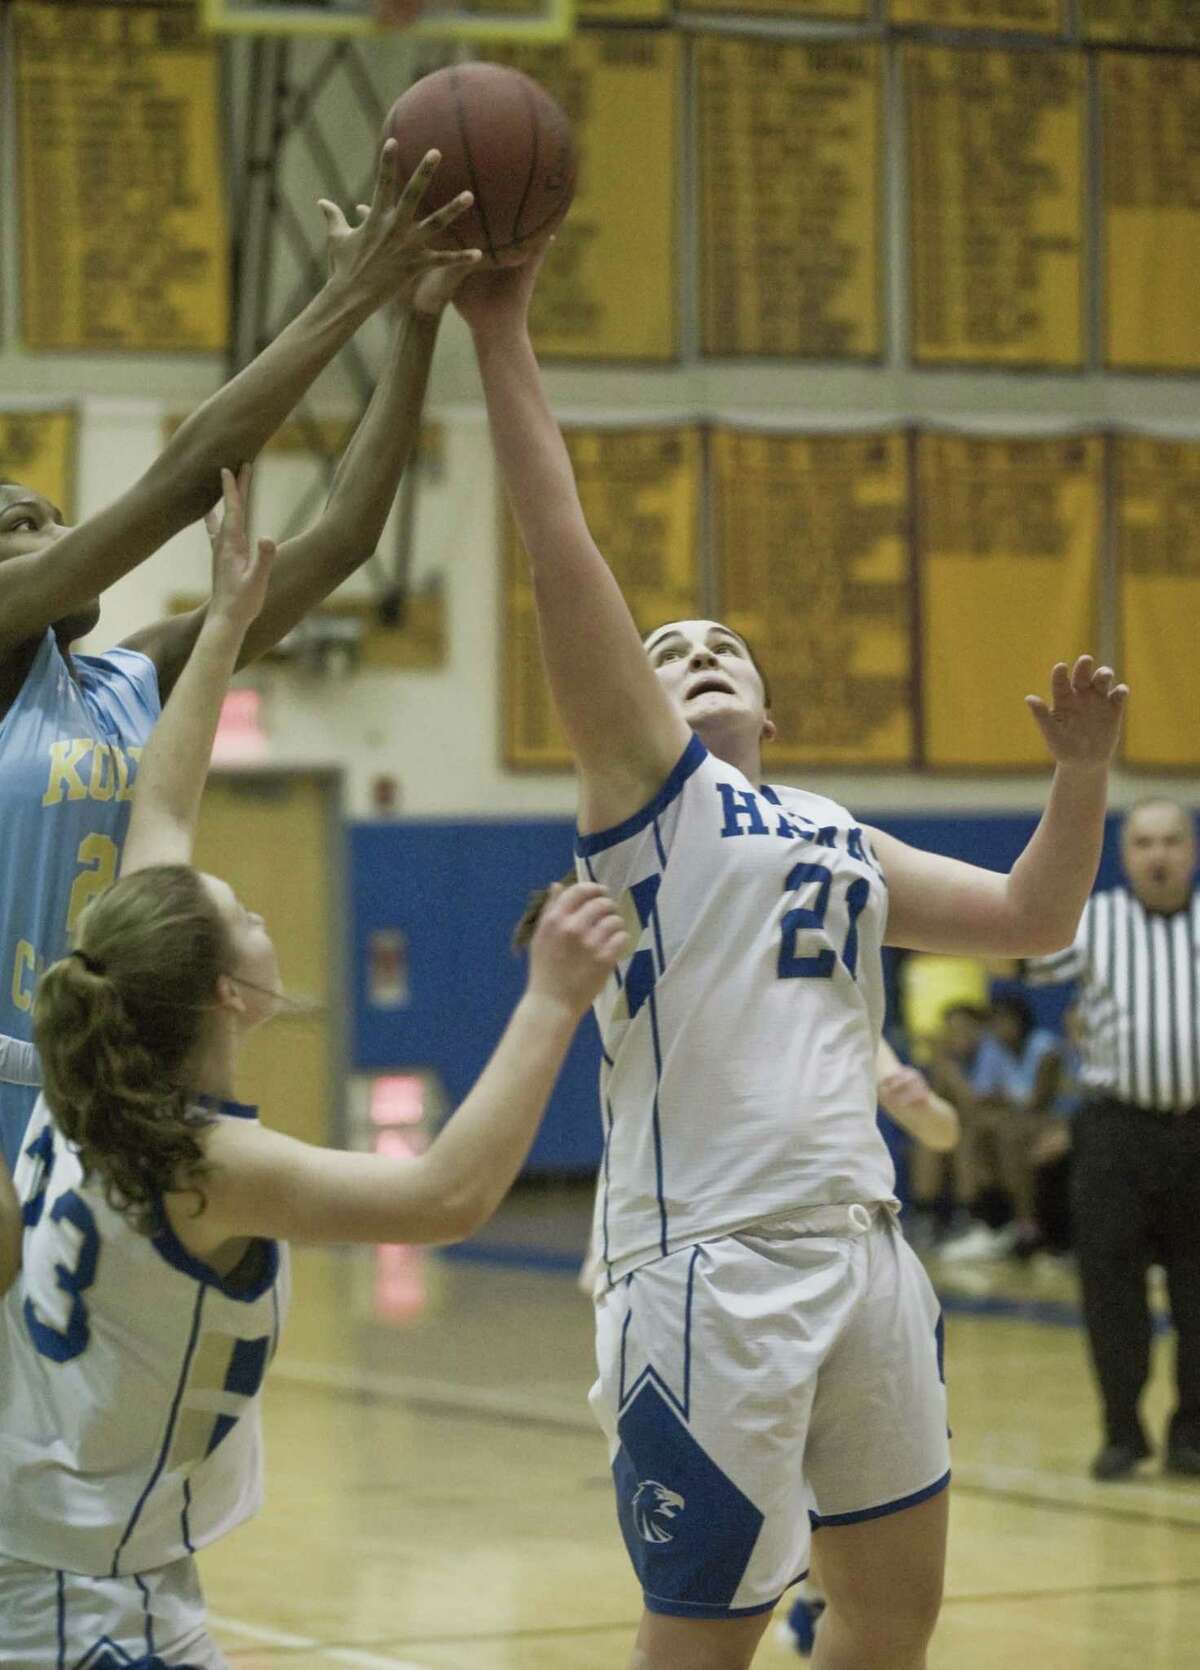 Newtown High School's Nicole DaPra reaches for a rebound during the SWC girls basketball tournament quarterfinal game against Kolbe Cathedral High School, played at Newtown. Monday, Feb. 18, 2019